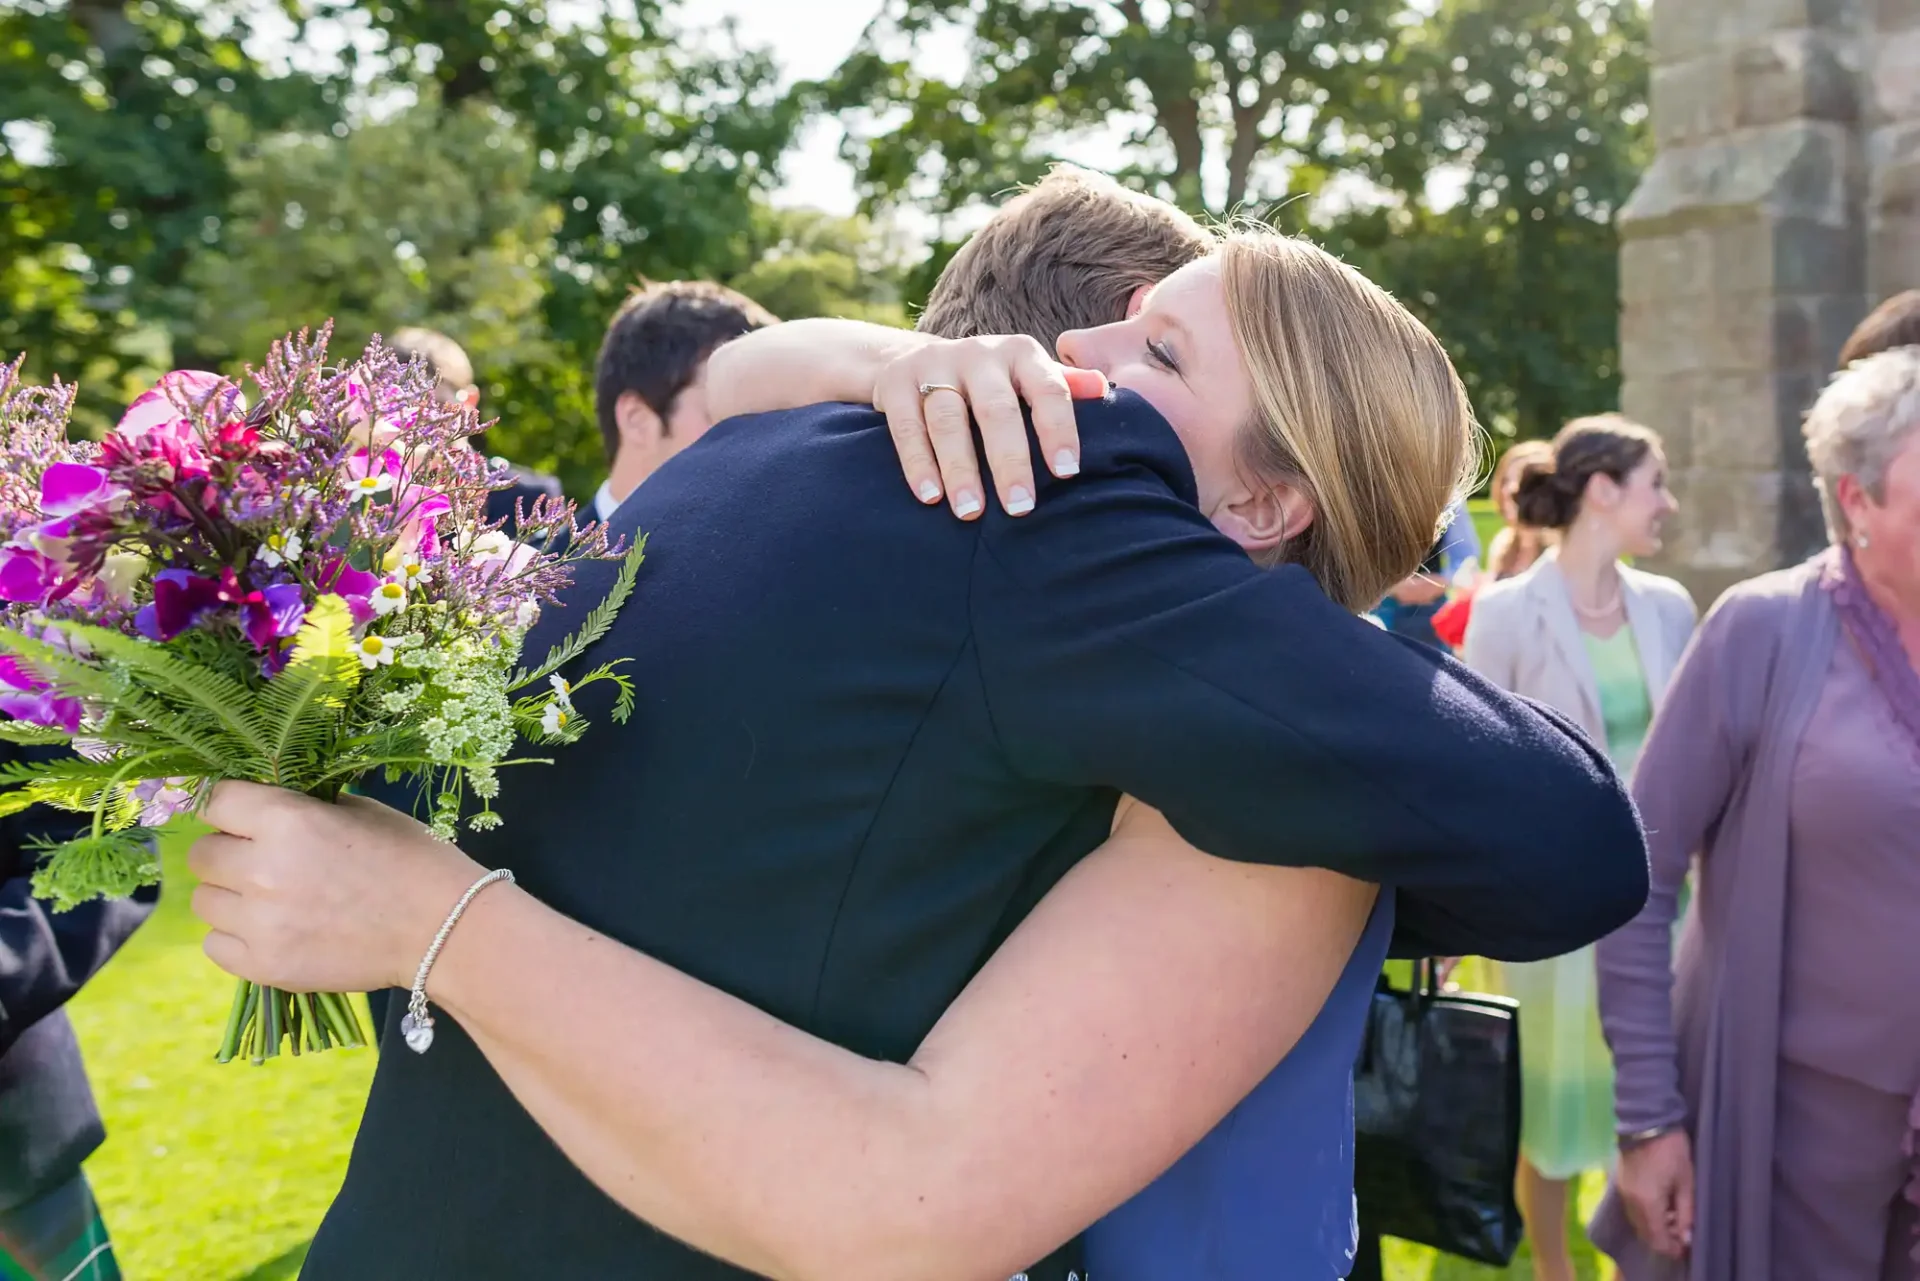 A woman clutching a bouquet of purple flowers embraces a man in a navy suit outdoors, surrounded by other people in a sunny park setting.